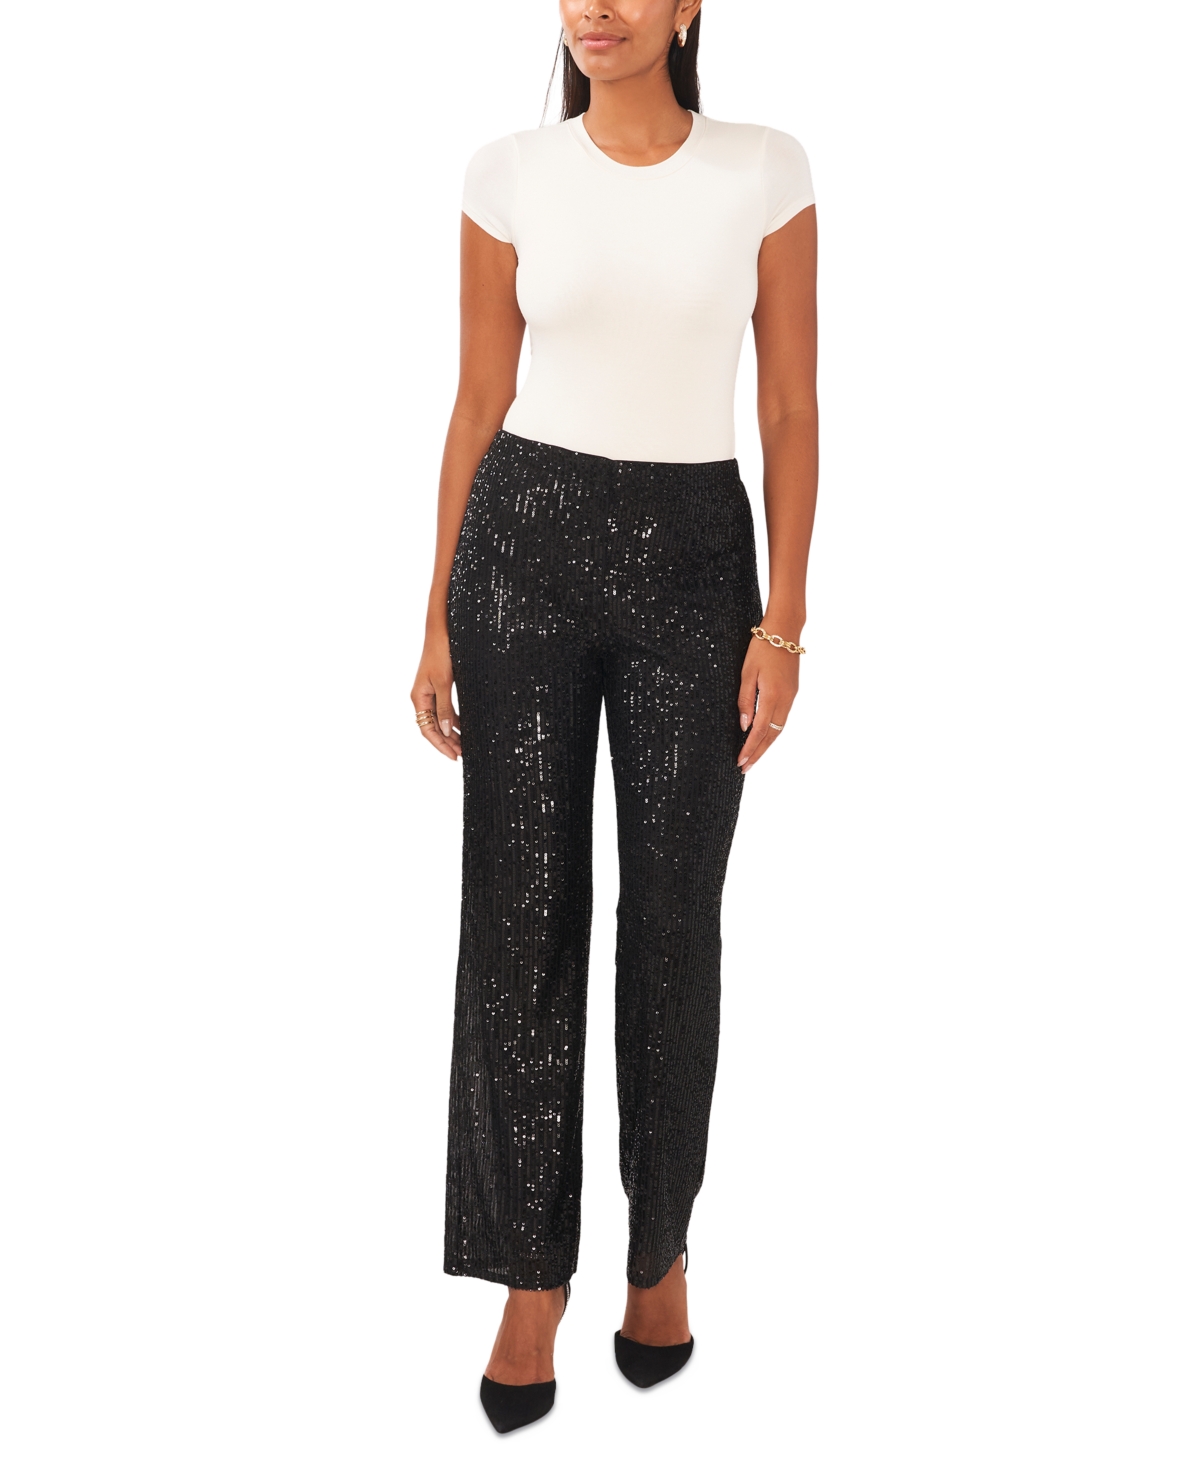 Msk Petite Sequined Mesh Pull-on Palazzo Pants In Black